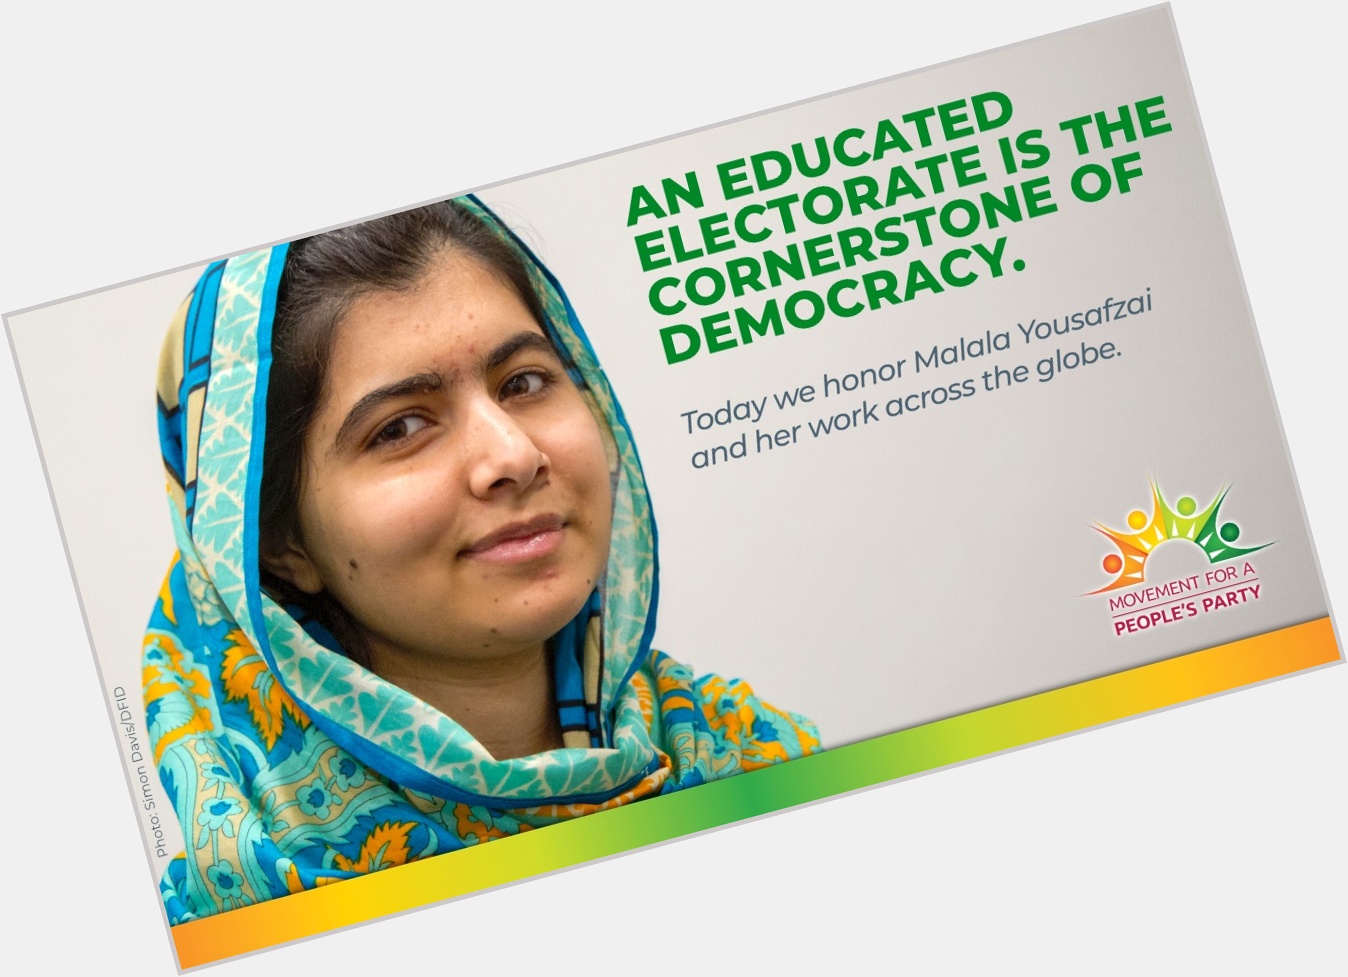 We\d like to wish a happy birthday to Malala Yousafzai. \"An educated electorate is the cornerstone of democracy\". 